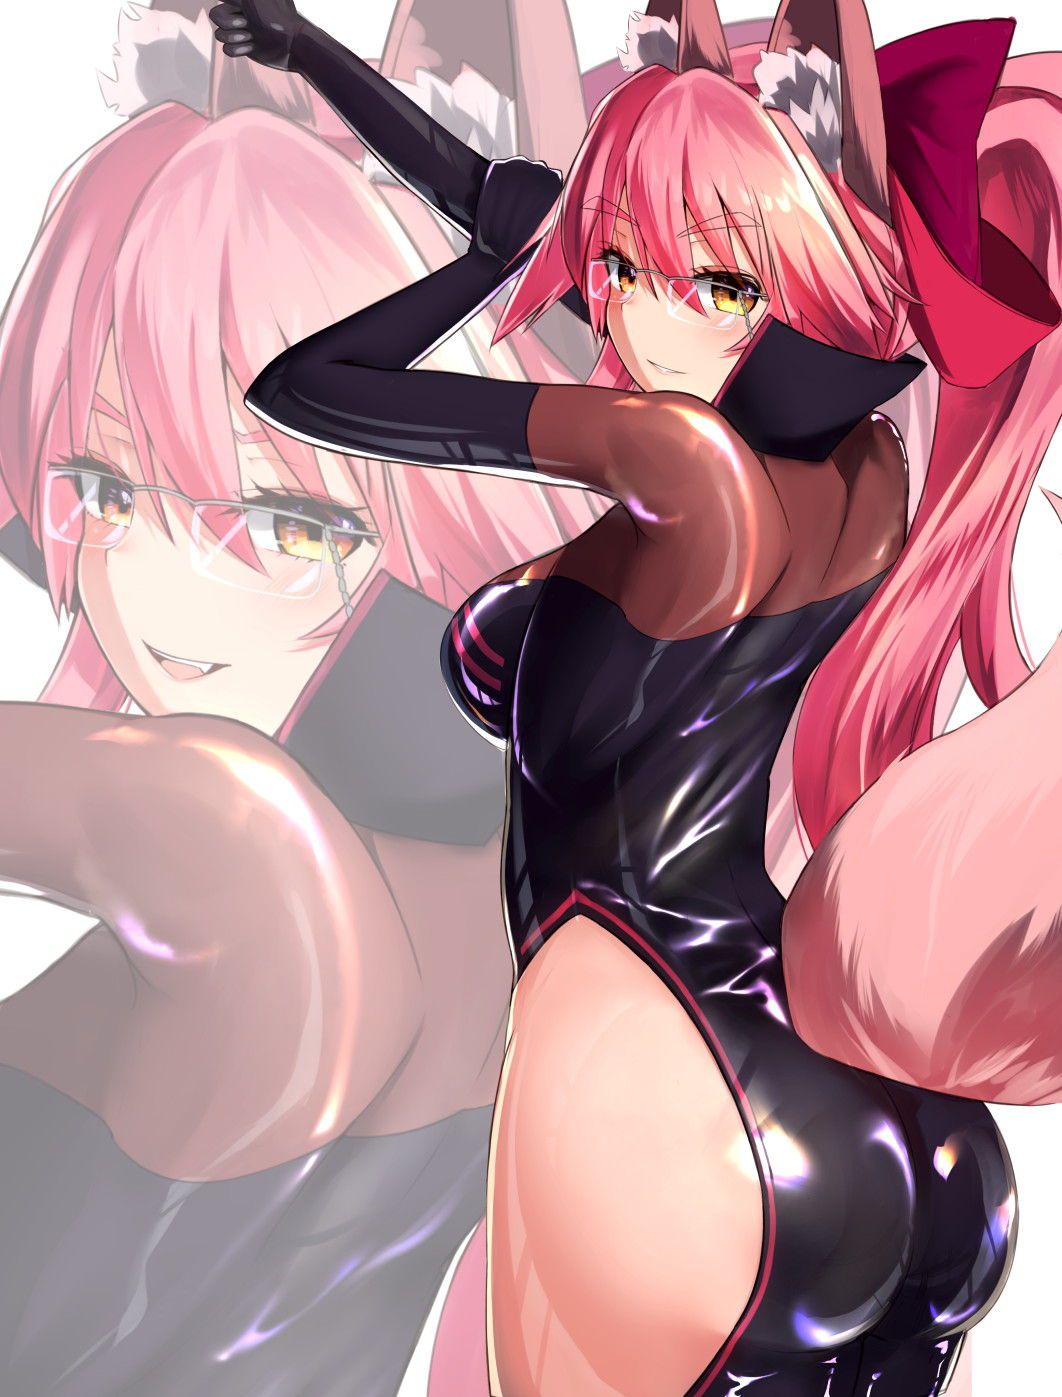 All-you-can-eat secondary erotic image [Fate Grand Order] 5